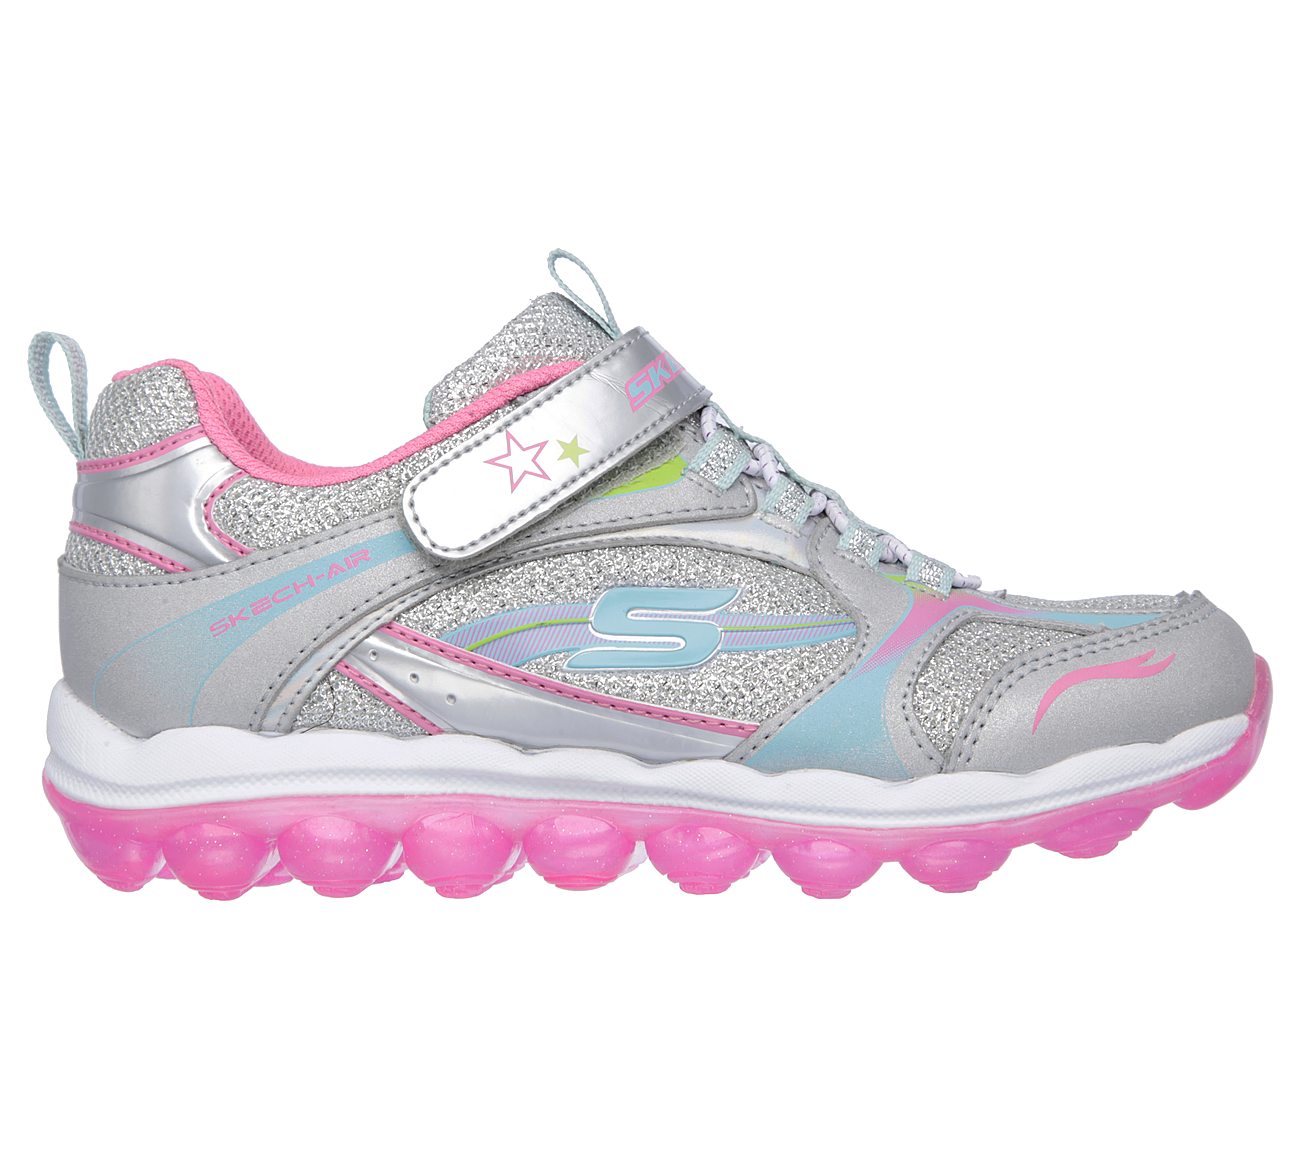 skechers with bubbles on bottom